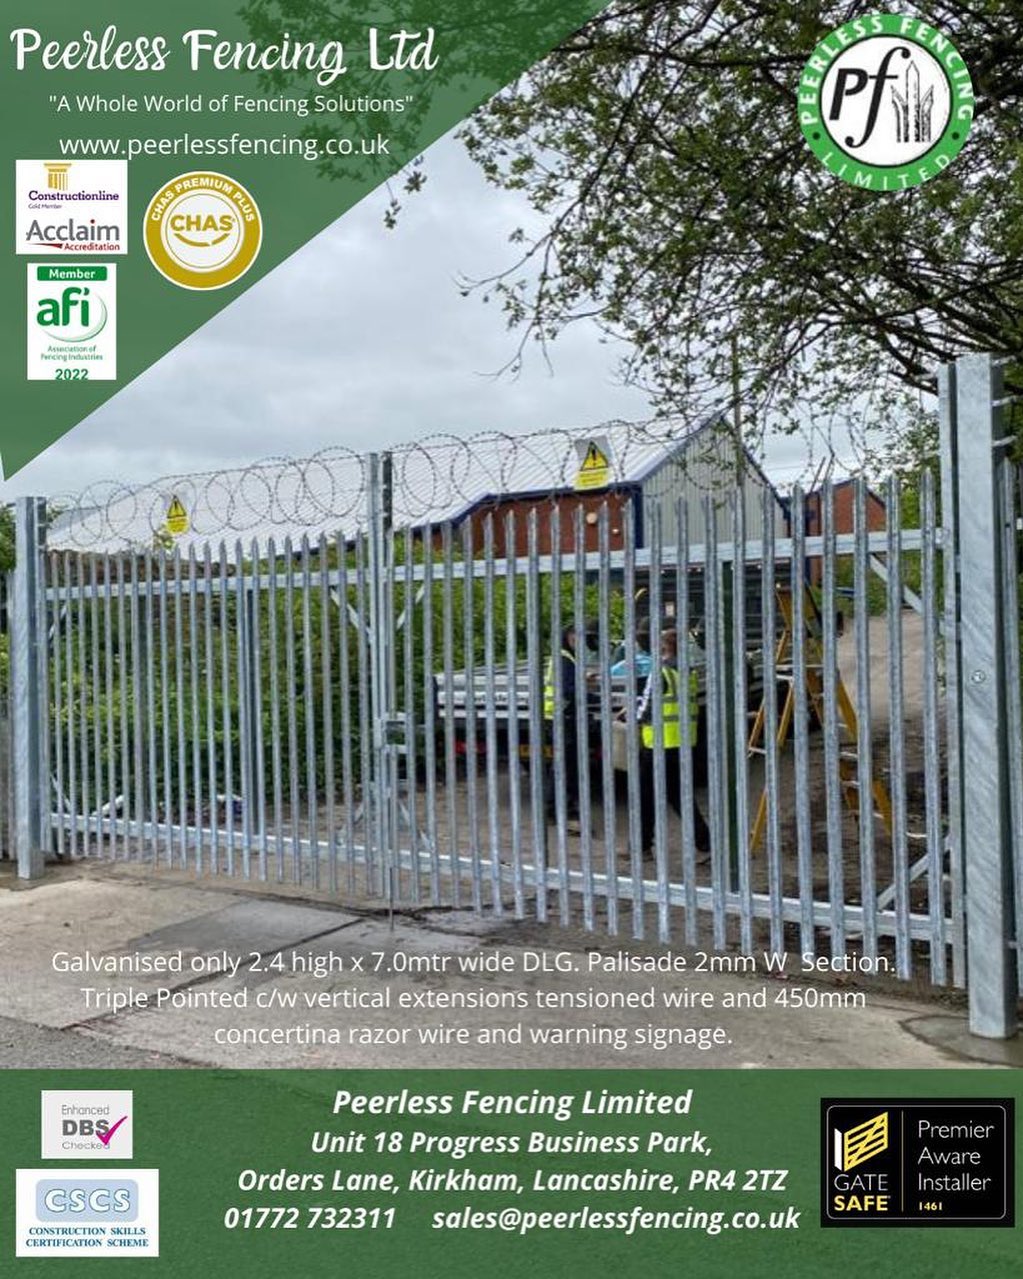 One of the most traditional forms of Security Gate is the Palisade Gate, as it provides a strong and durable deterrent. #crimeprevention #securitygates #palisadefencing #awholeworldoffencingsolutions #fencingcontractor